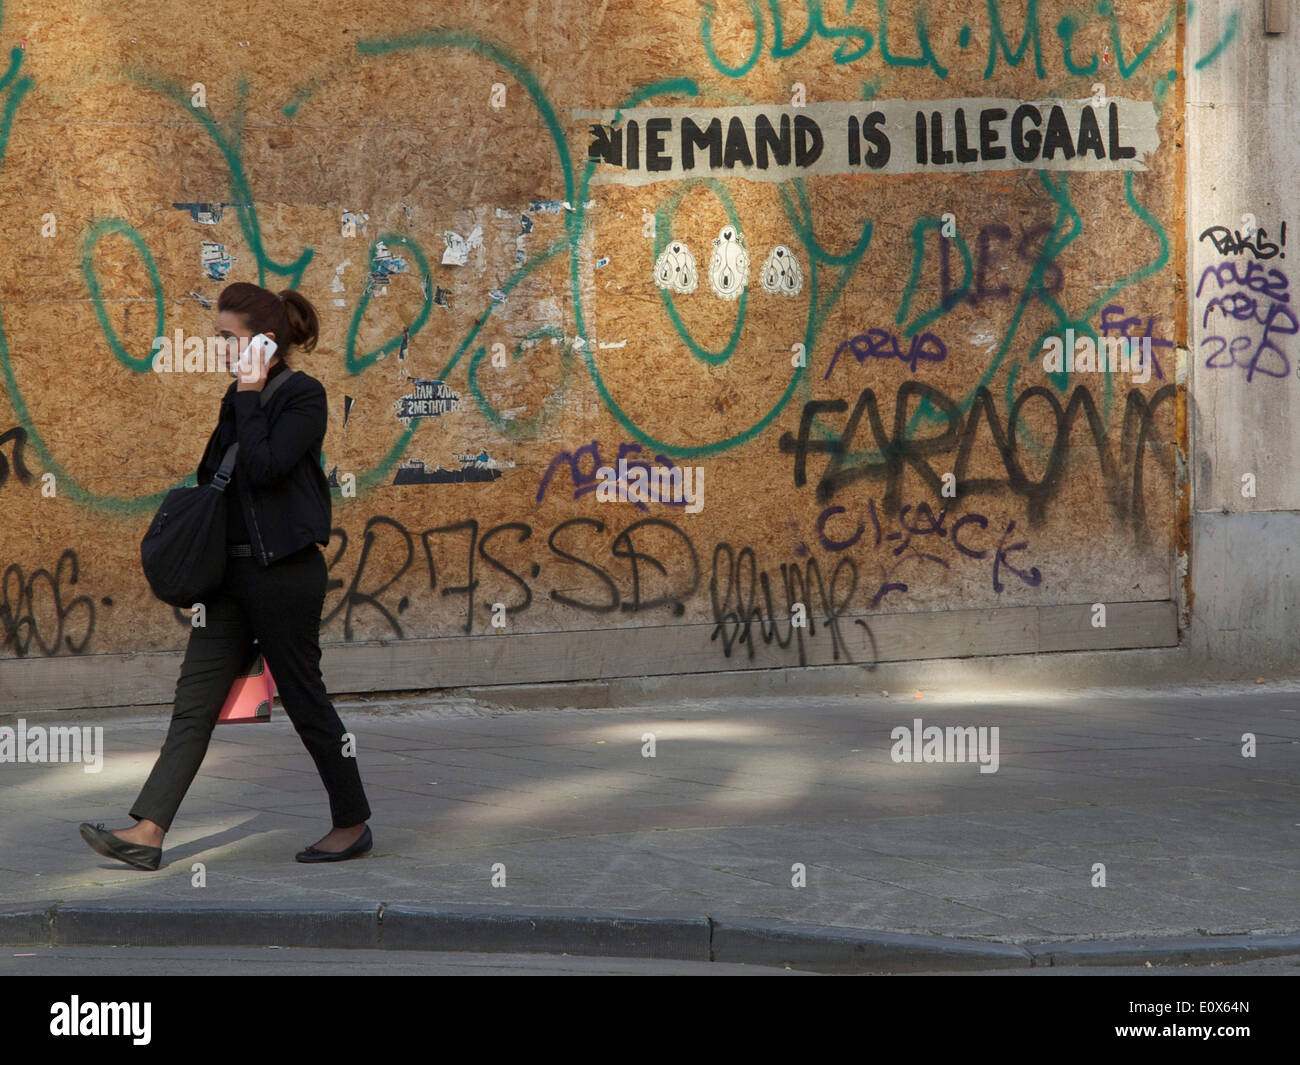 Woman talking on mobile phone with graffiti saying nobody is illegal in Dutch language, Brussels, Belgium Stock Photo